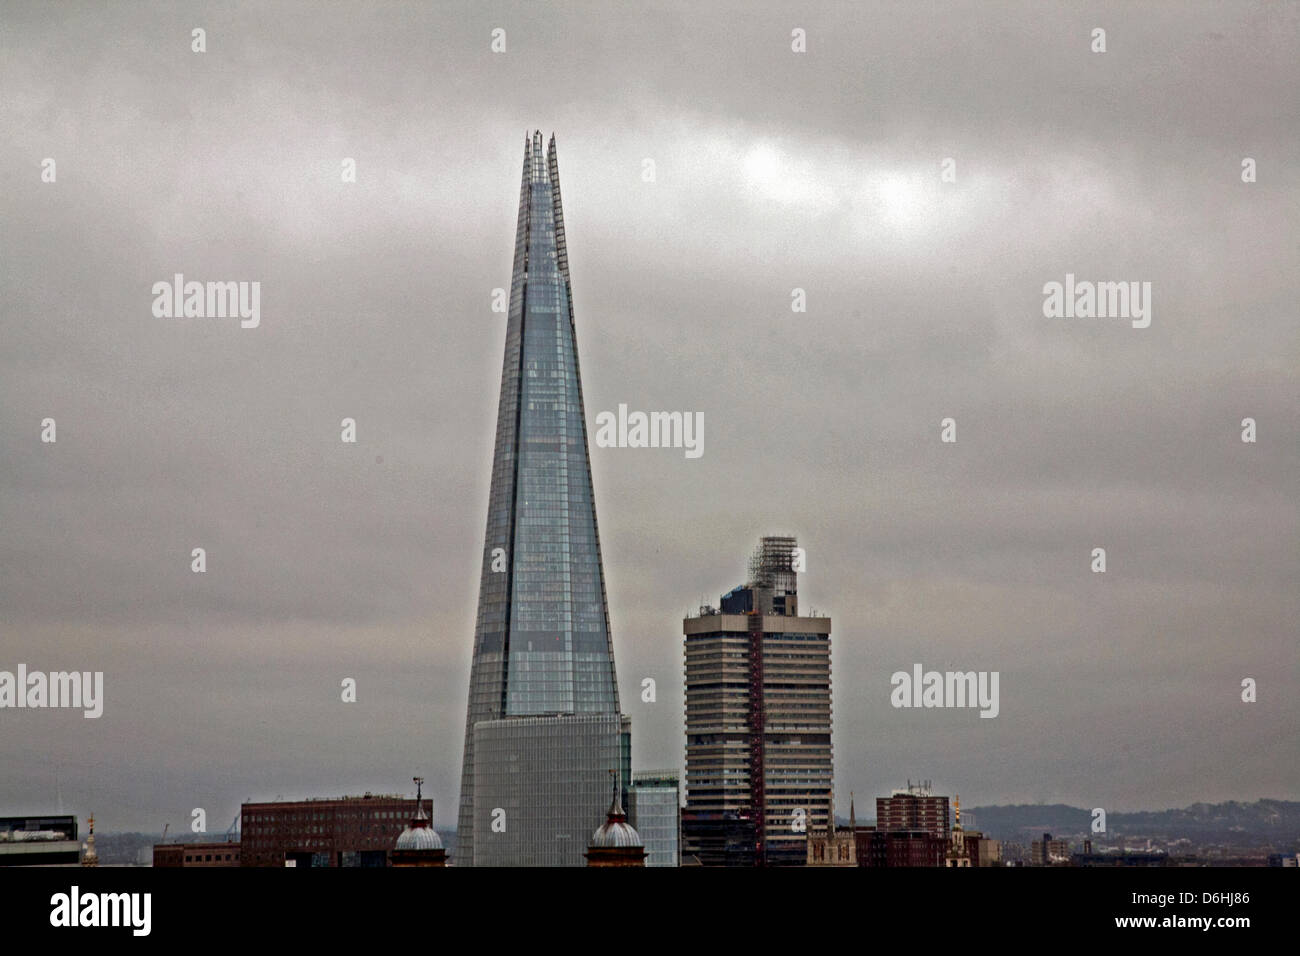 View of the Shard on the day of Baroness Thatcher's funeral, London, UK on 17th April 2013. Margaret Thatcher also known as the 'Iron Lady' was the longest-serving British Prime Minister of the 20th century and is the only woman to have held the office. Stock Photo